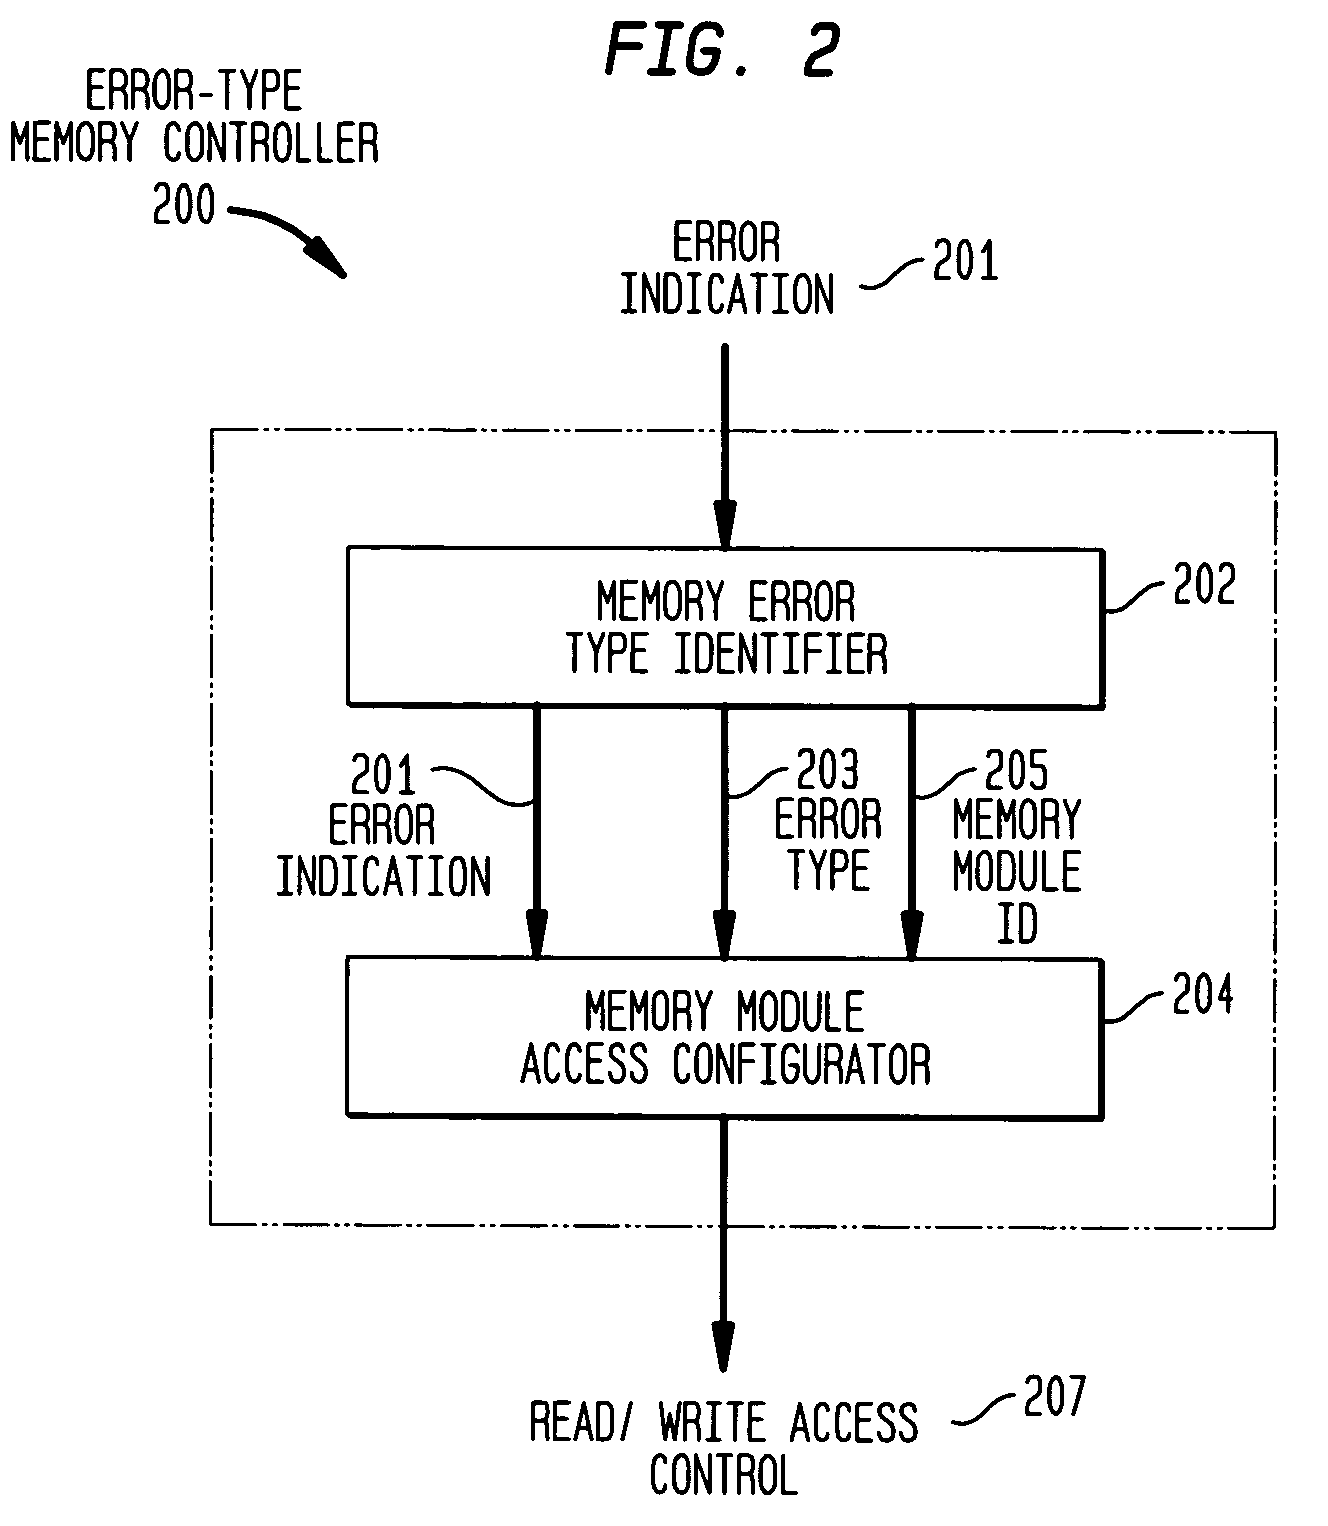 Restoring access to a failed data storage device in a redundant memory system